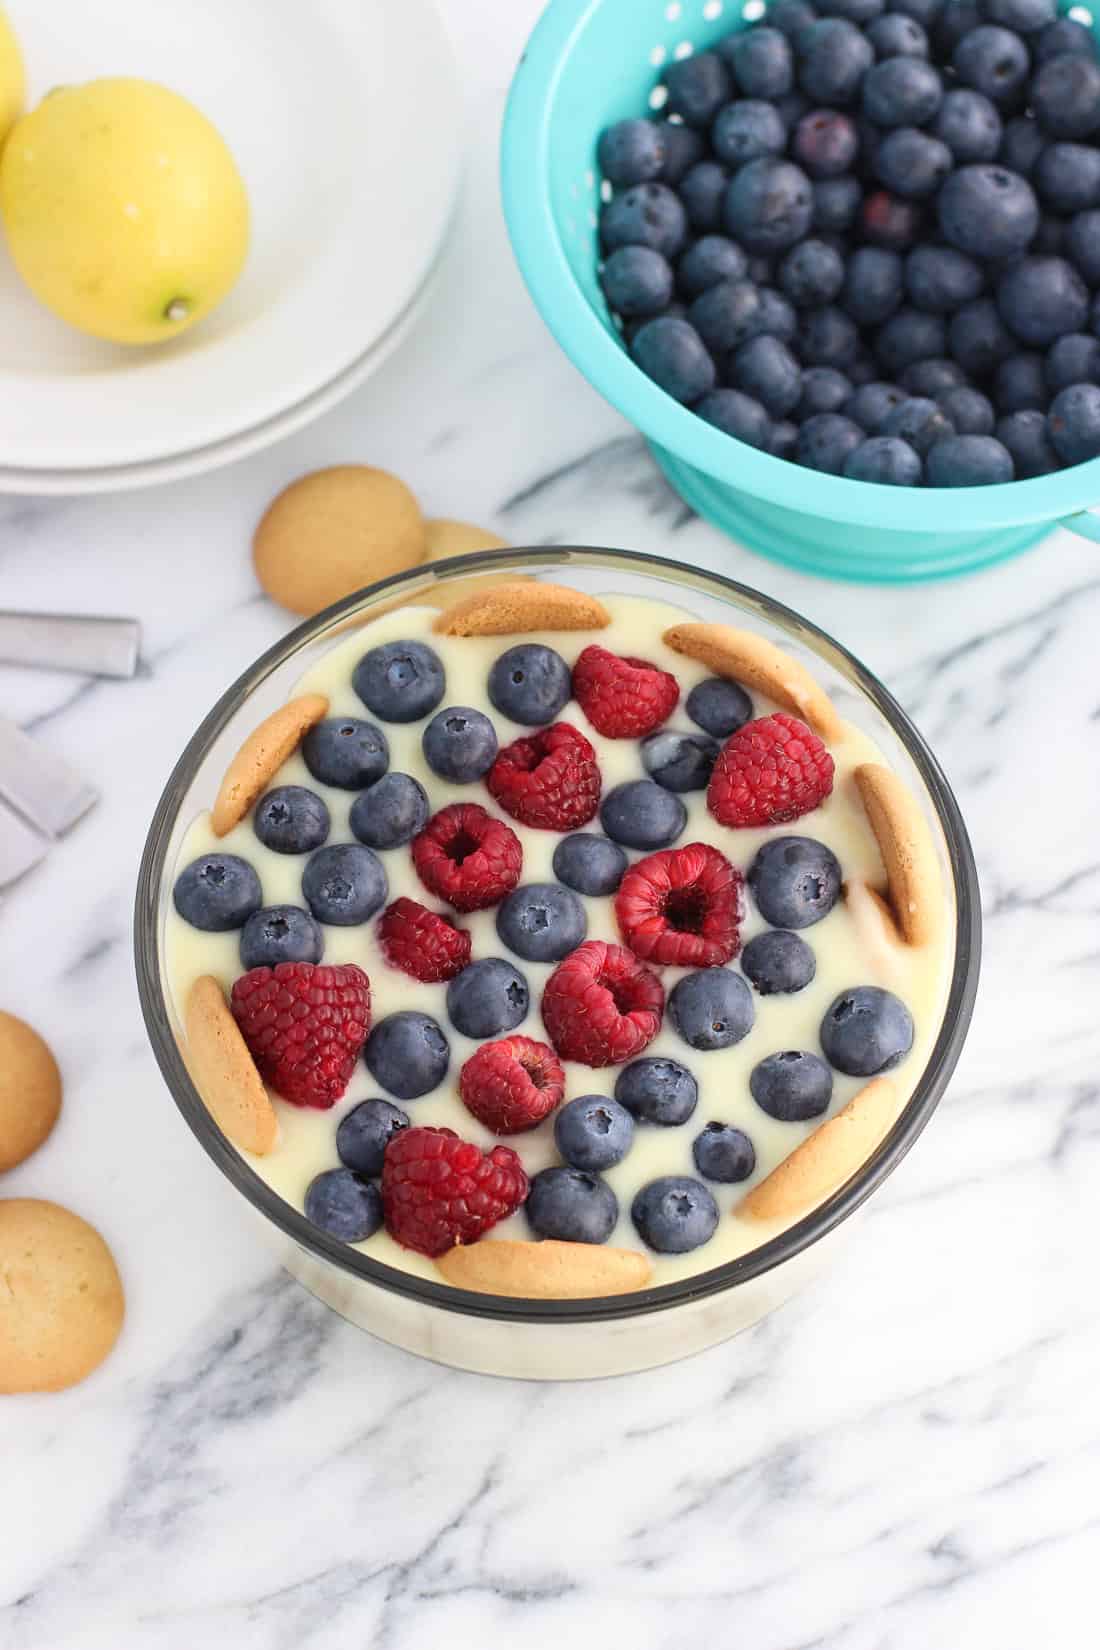 A bowl of lemon pudding made with vanilla wafers and fresh fruit surrounded by recipe ingredients.